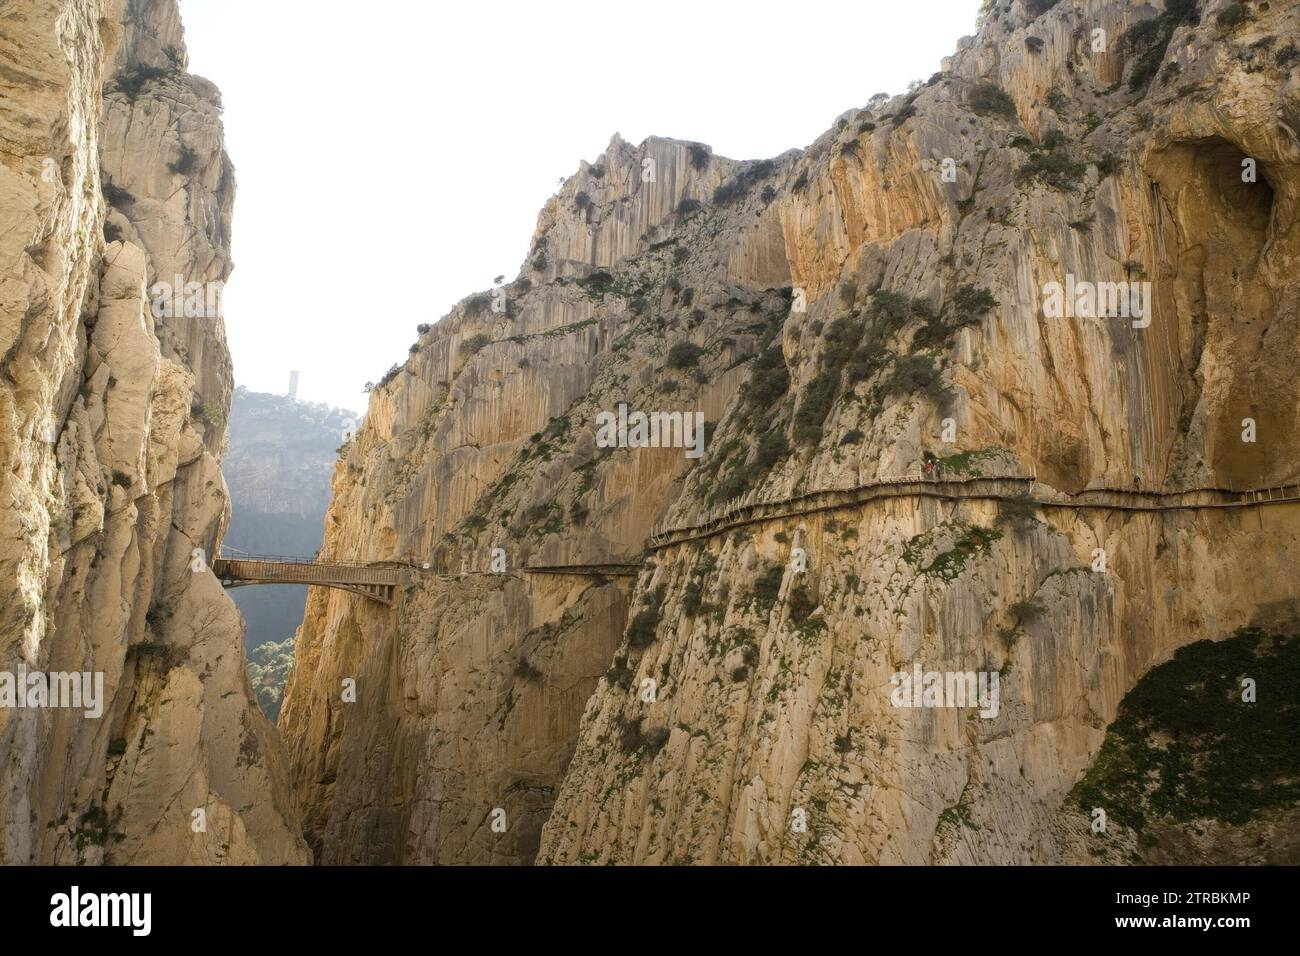 Gitanes Gorge (Málaga), 3/23/2015. The gorge runs between the municipalities of Ardales, Álora and Antequera, next to the village and the El Chorro reservoir. There is a three-kilometer-long path that was built for maintenance workers to access the El Chorro reservoir, hanging from the walls of the gorge. King Alfonso XIII visited it in 1921 and since then it began to be known as Caminito del Rey, recently restored. Credit: Album / Archivo ABC / Raúl Doblado Stock Photo